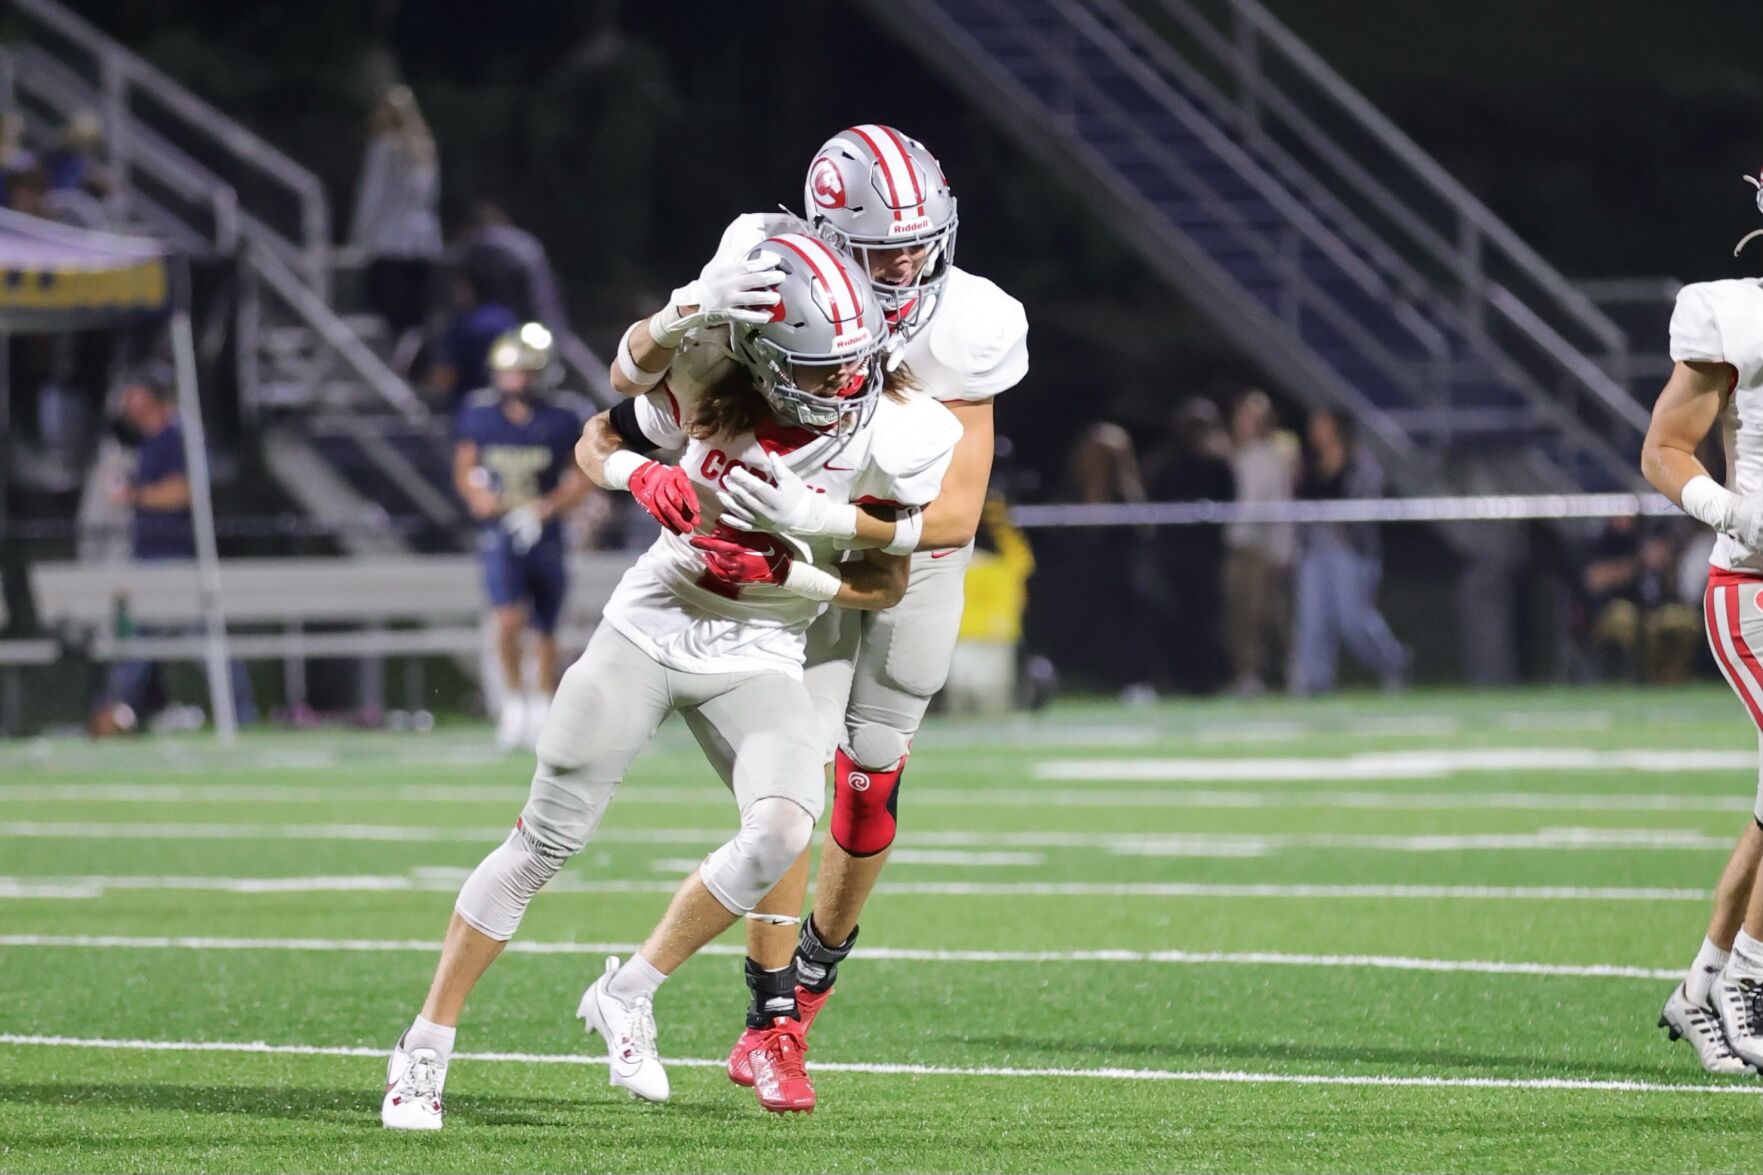 Corbin Redhounds Enter Class 4A Playoffs With Perfect Regular Season Record